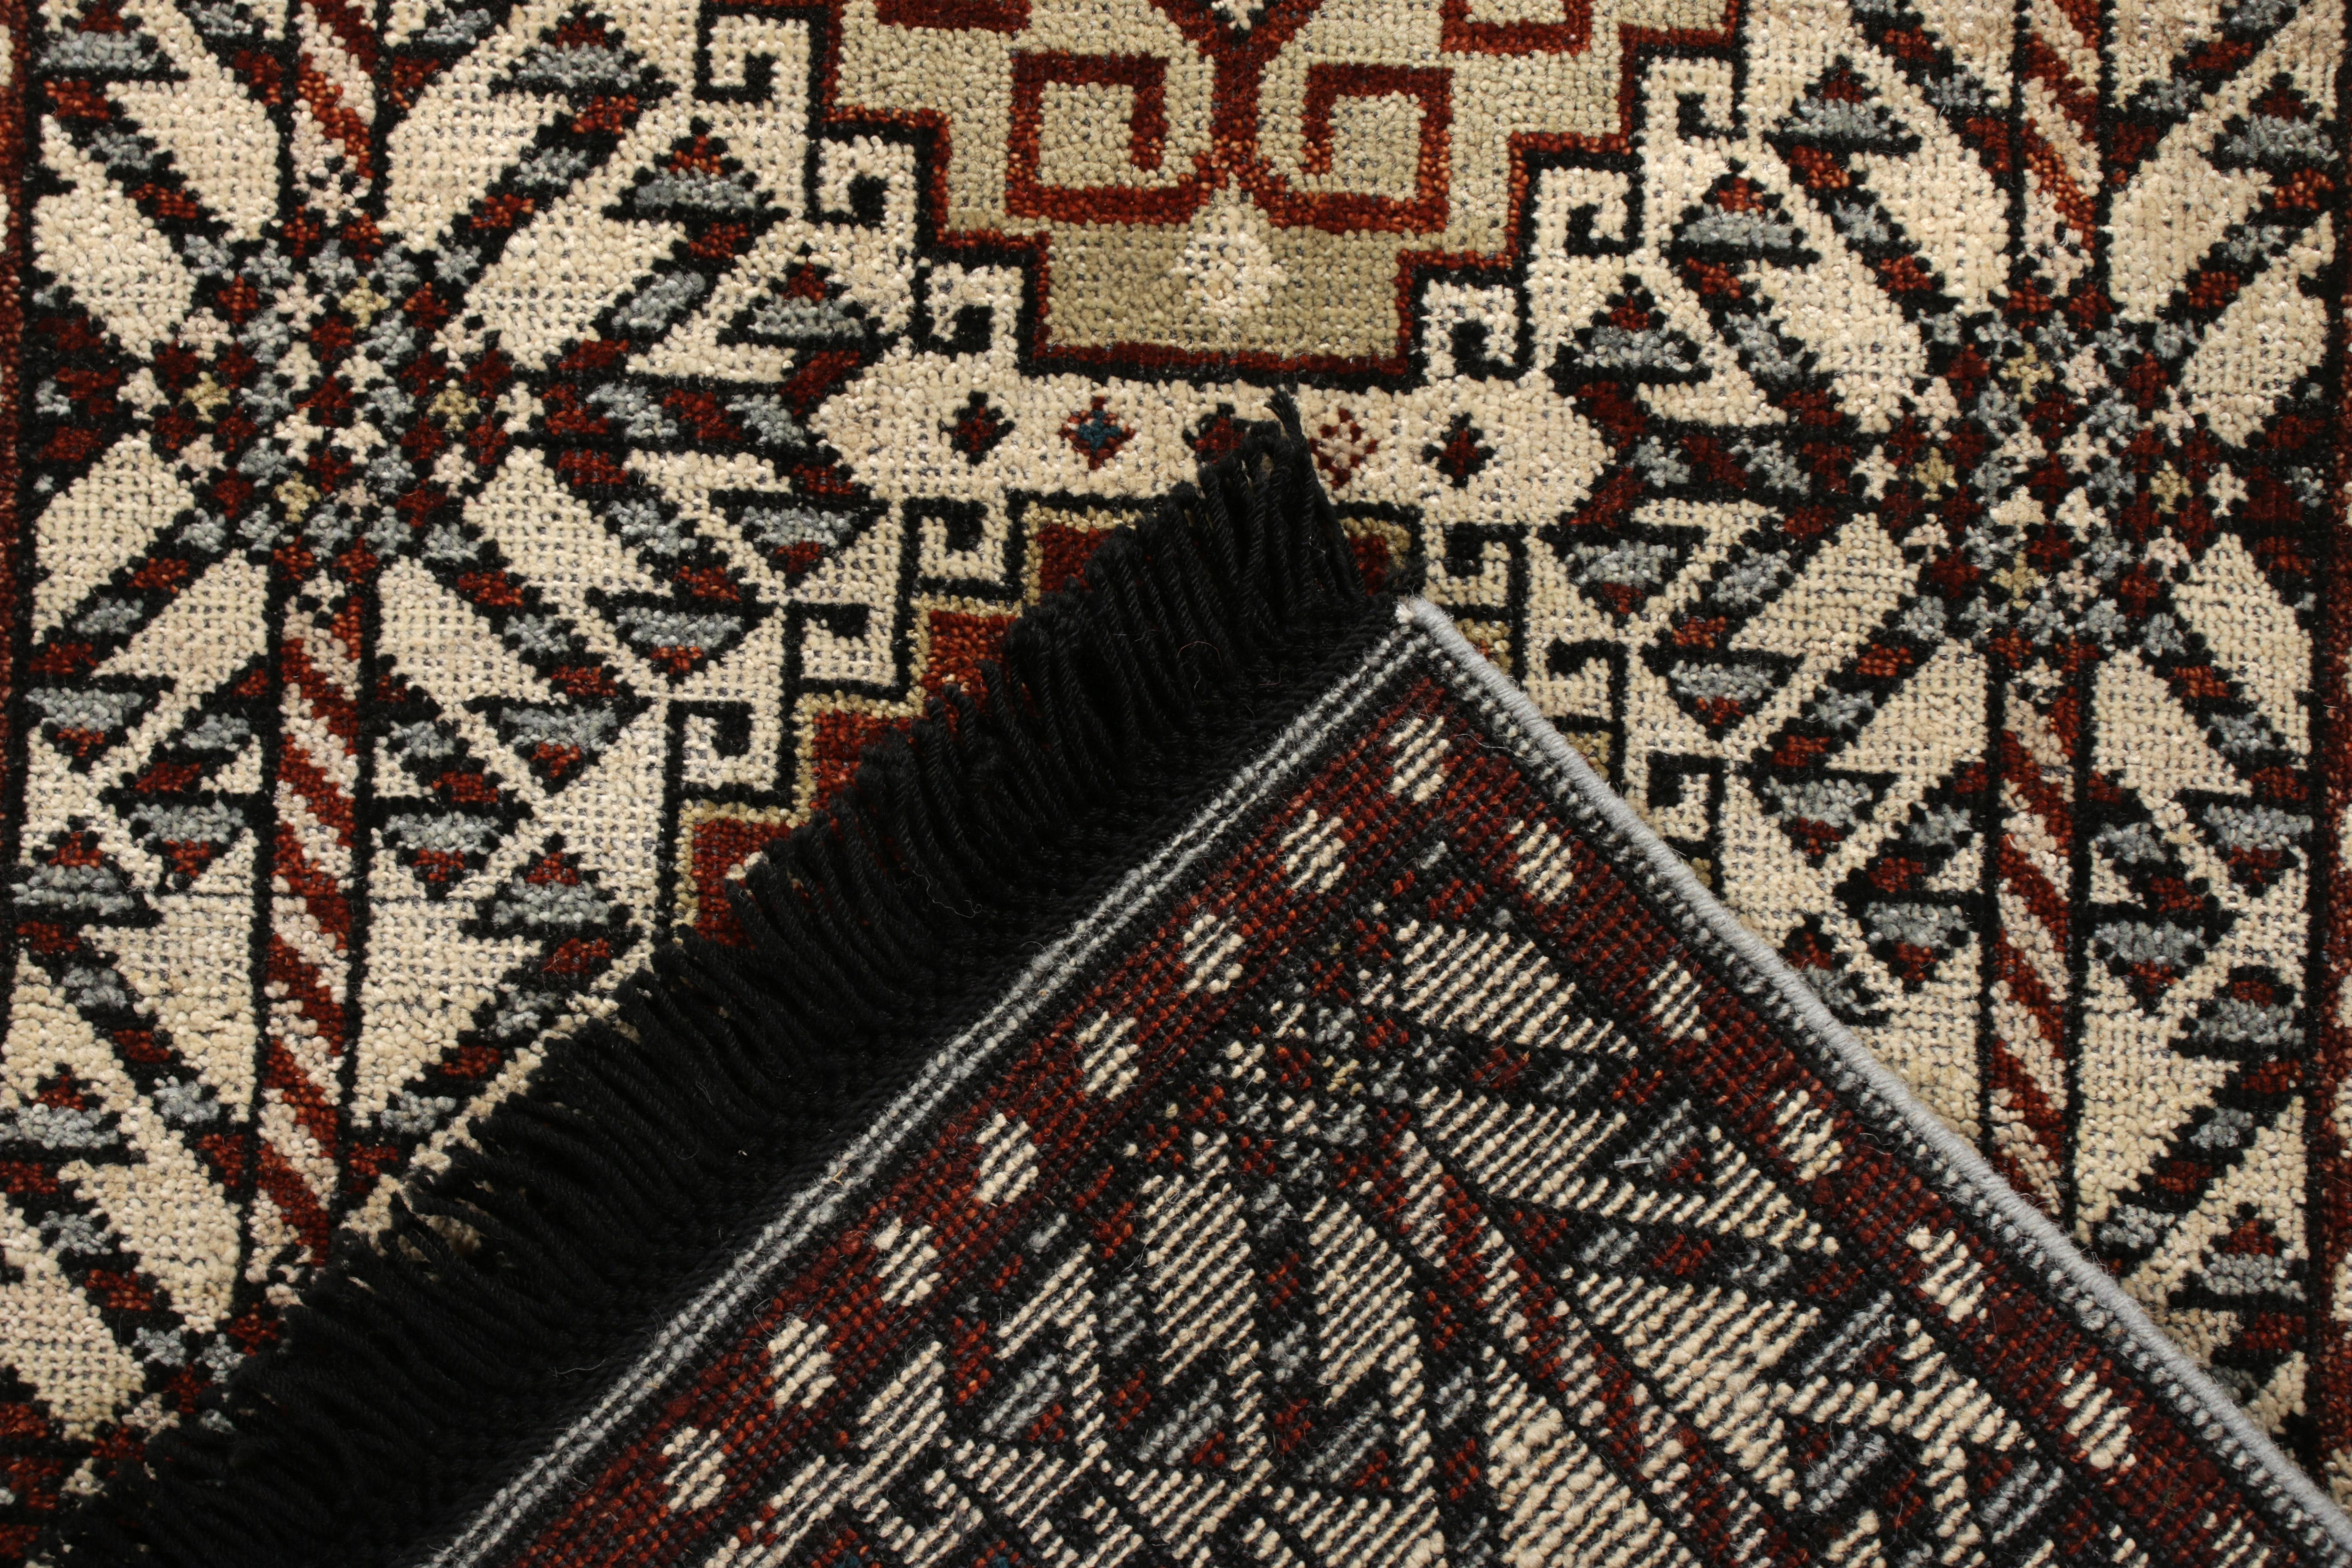 Hand-Woven Rug & Kilim's Hand Knotted Qashqai Style Rug in Beige Red Geometric Pattern